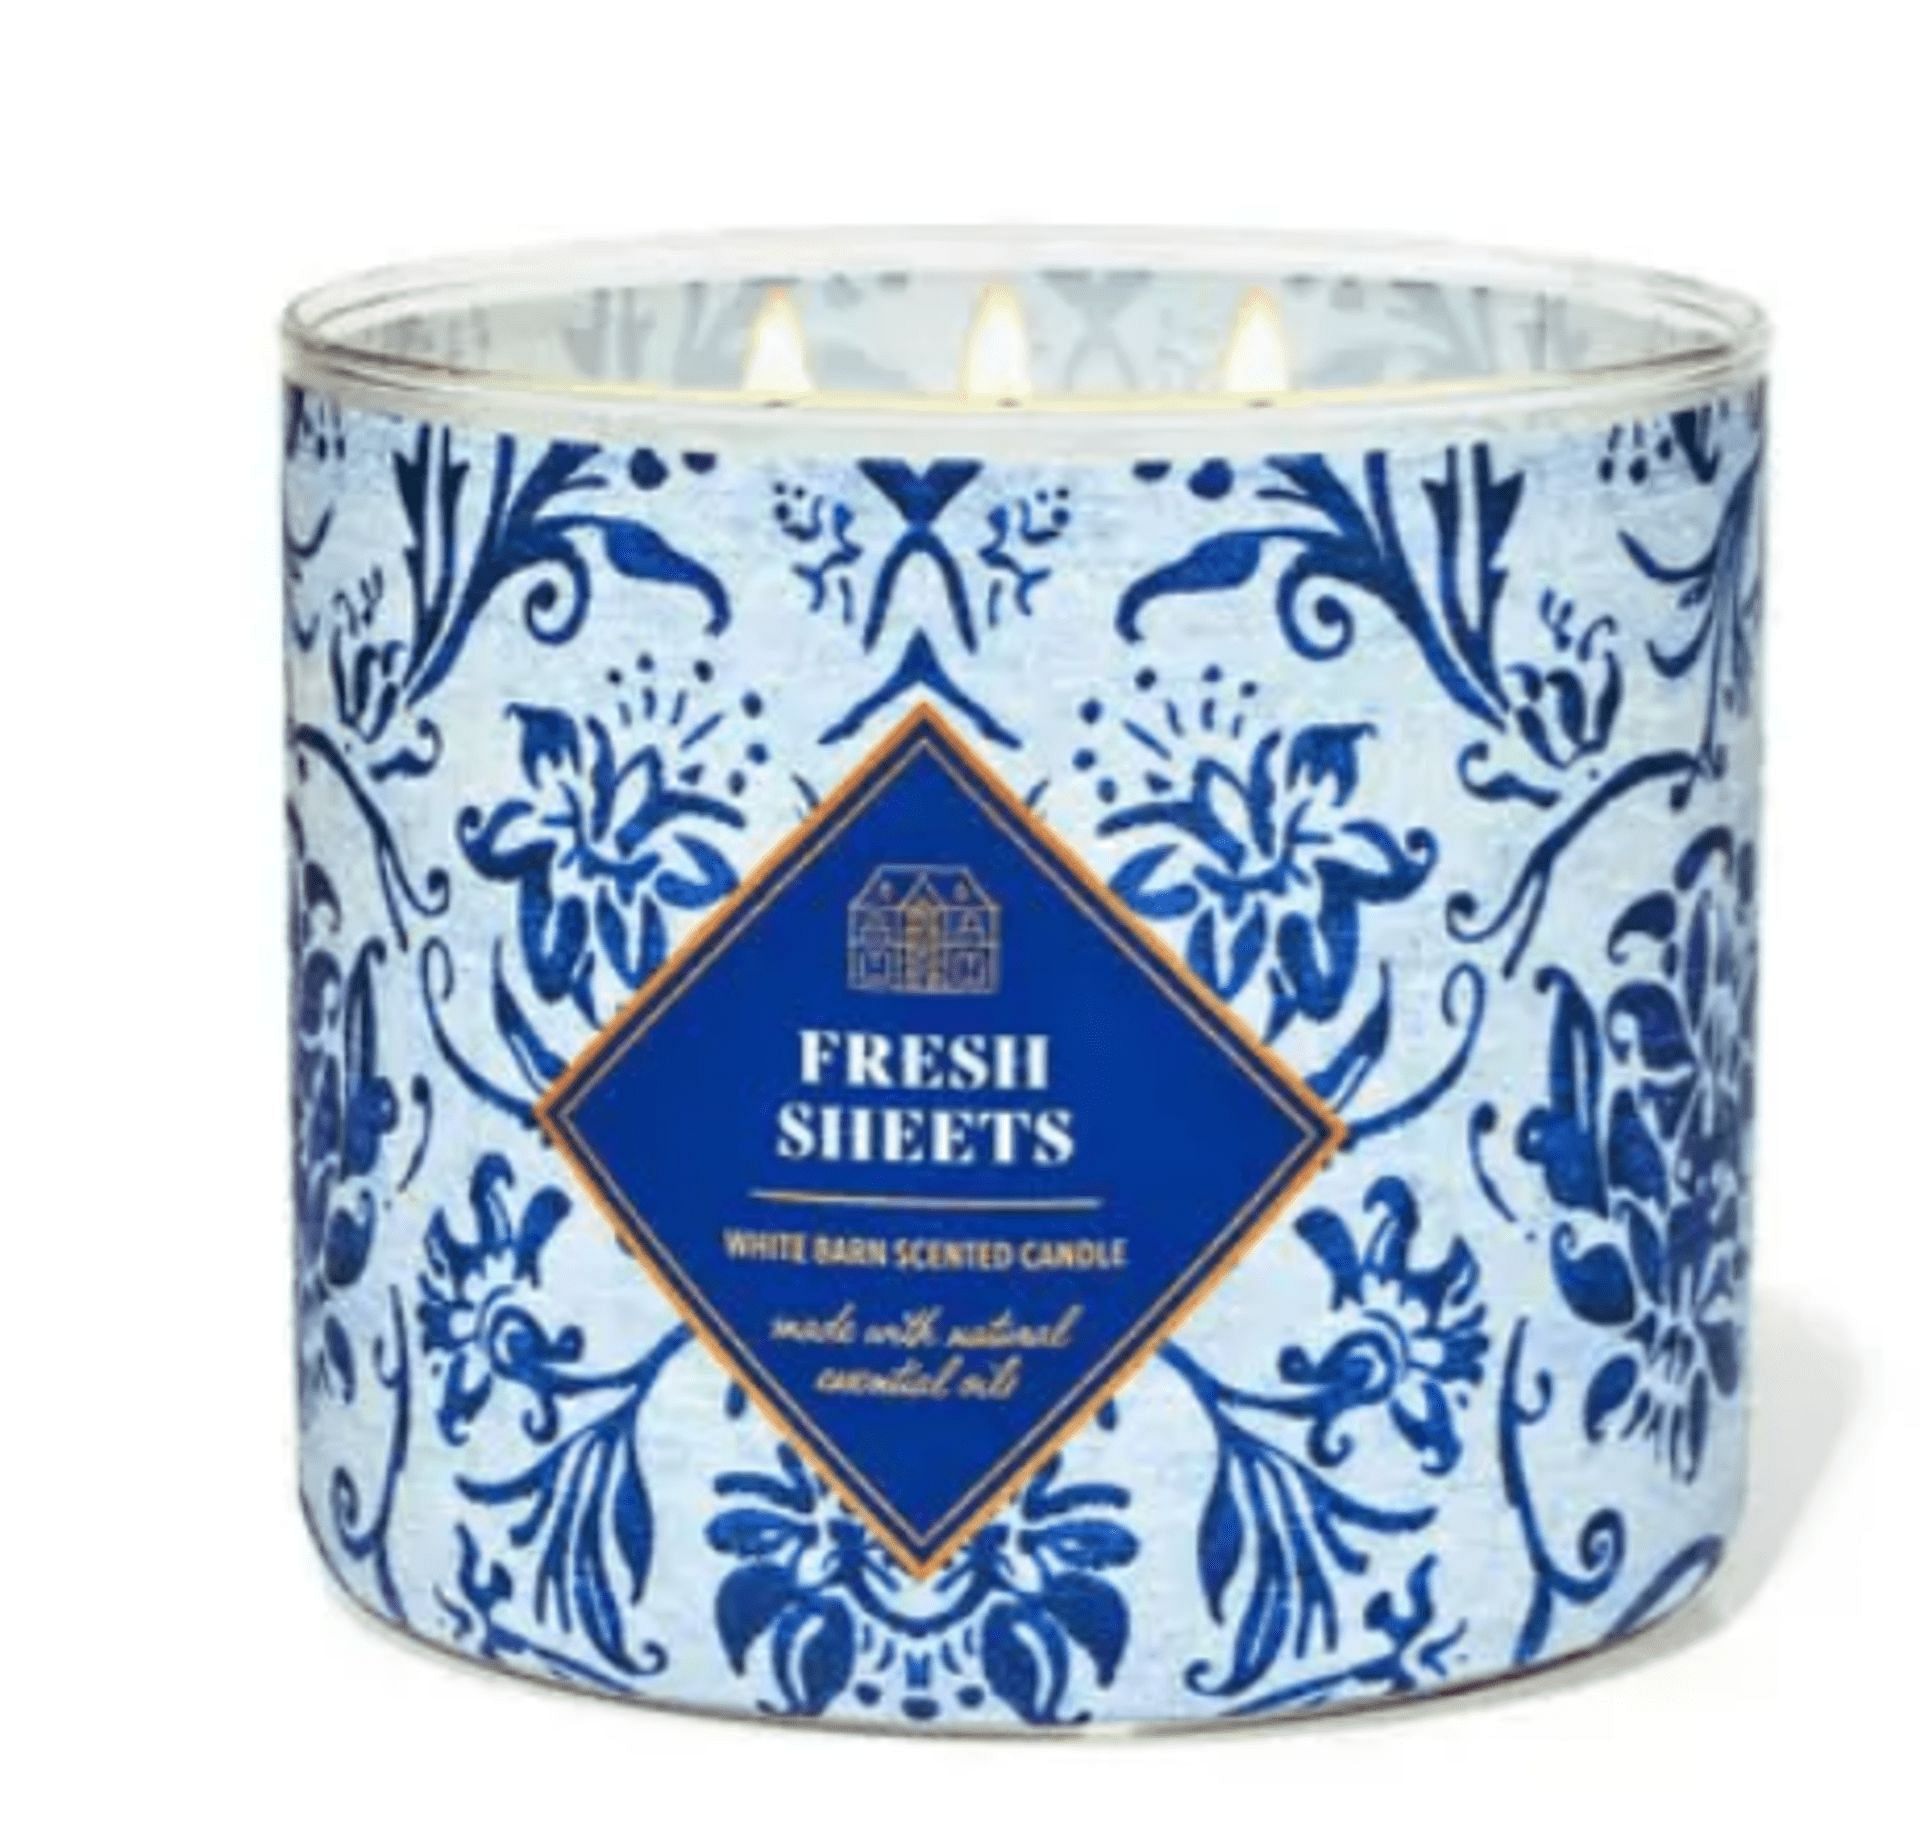 Fresh Sheets Scent (Image via Bath and Body Works)